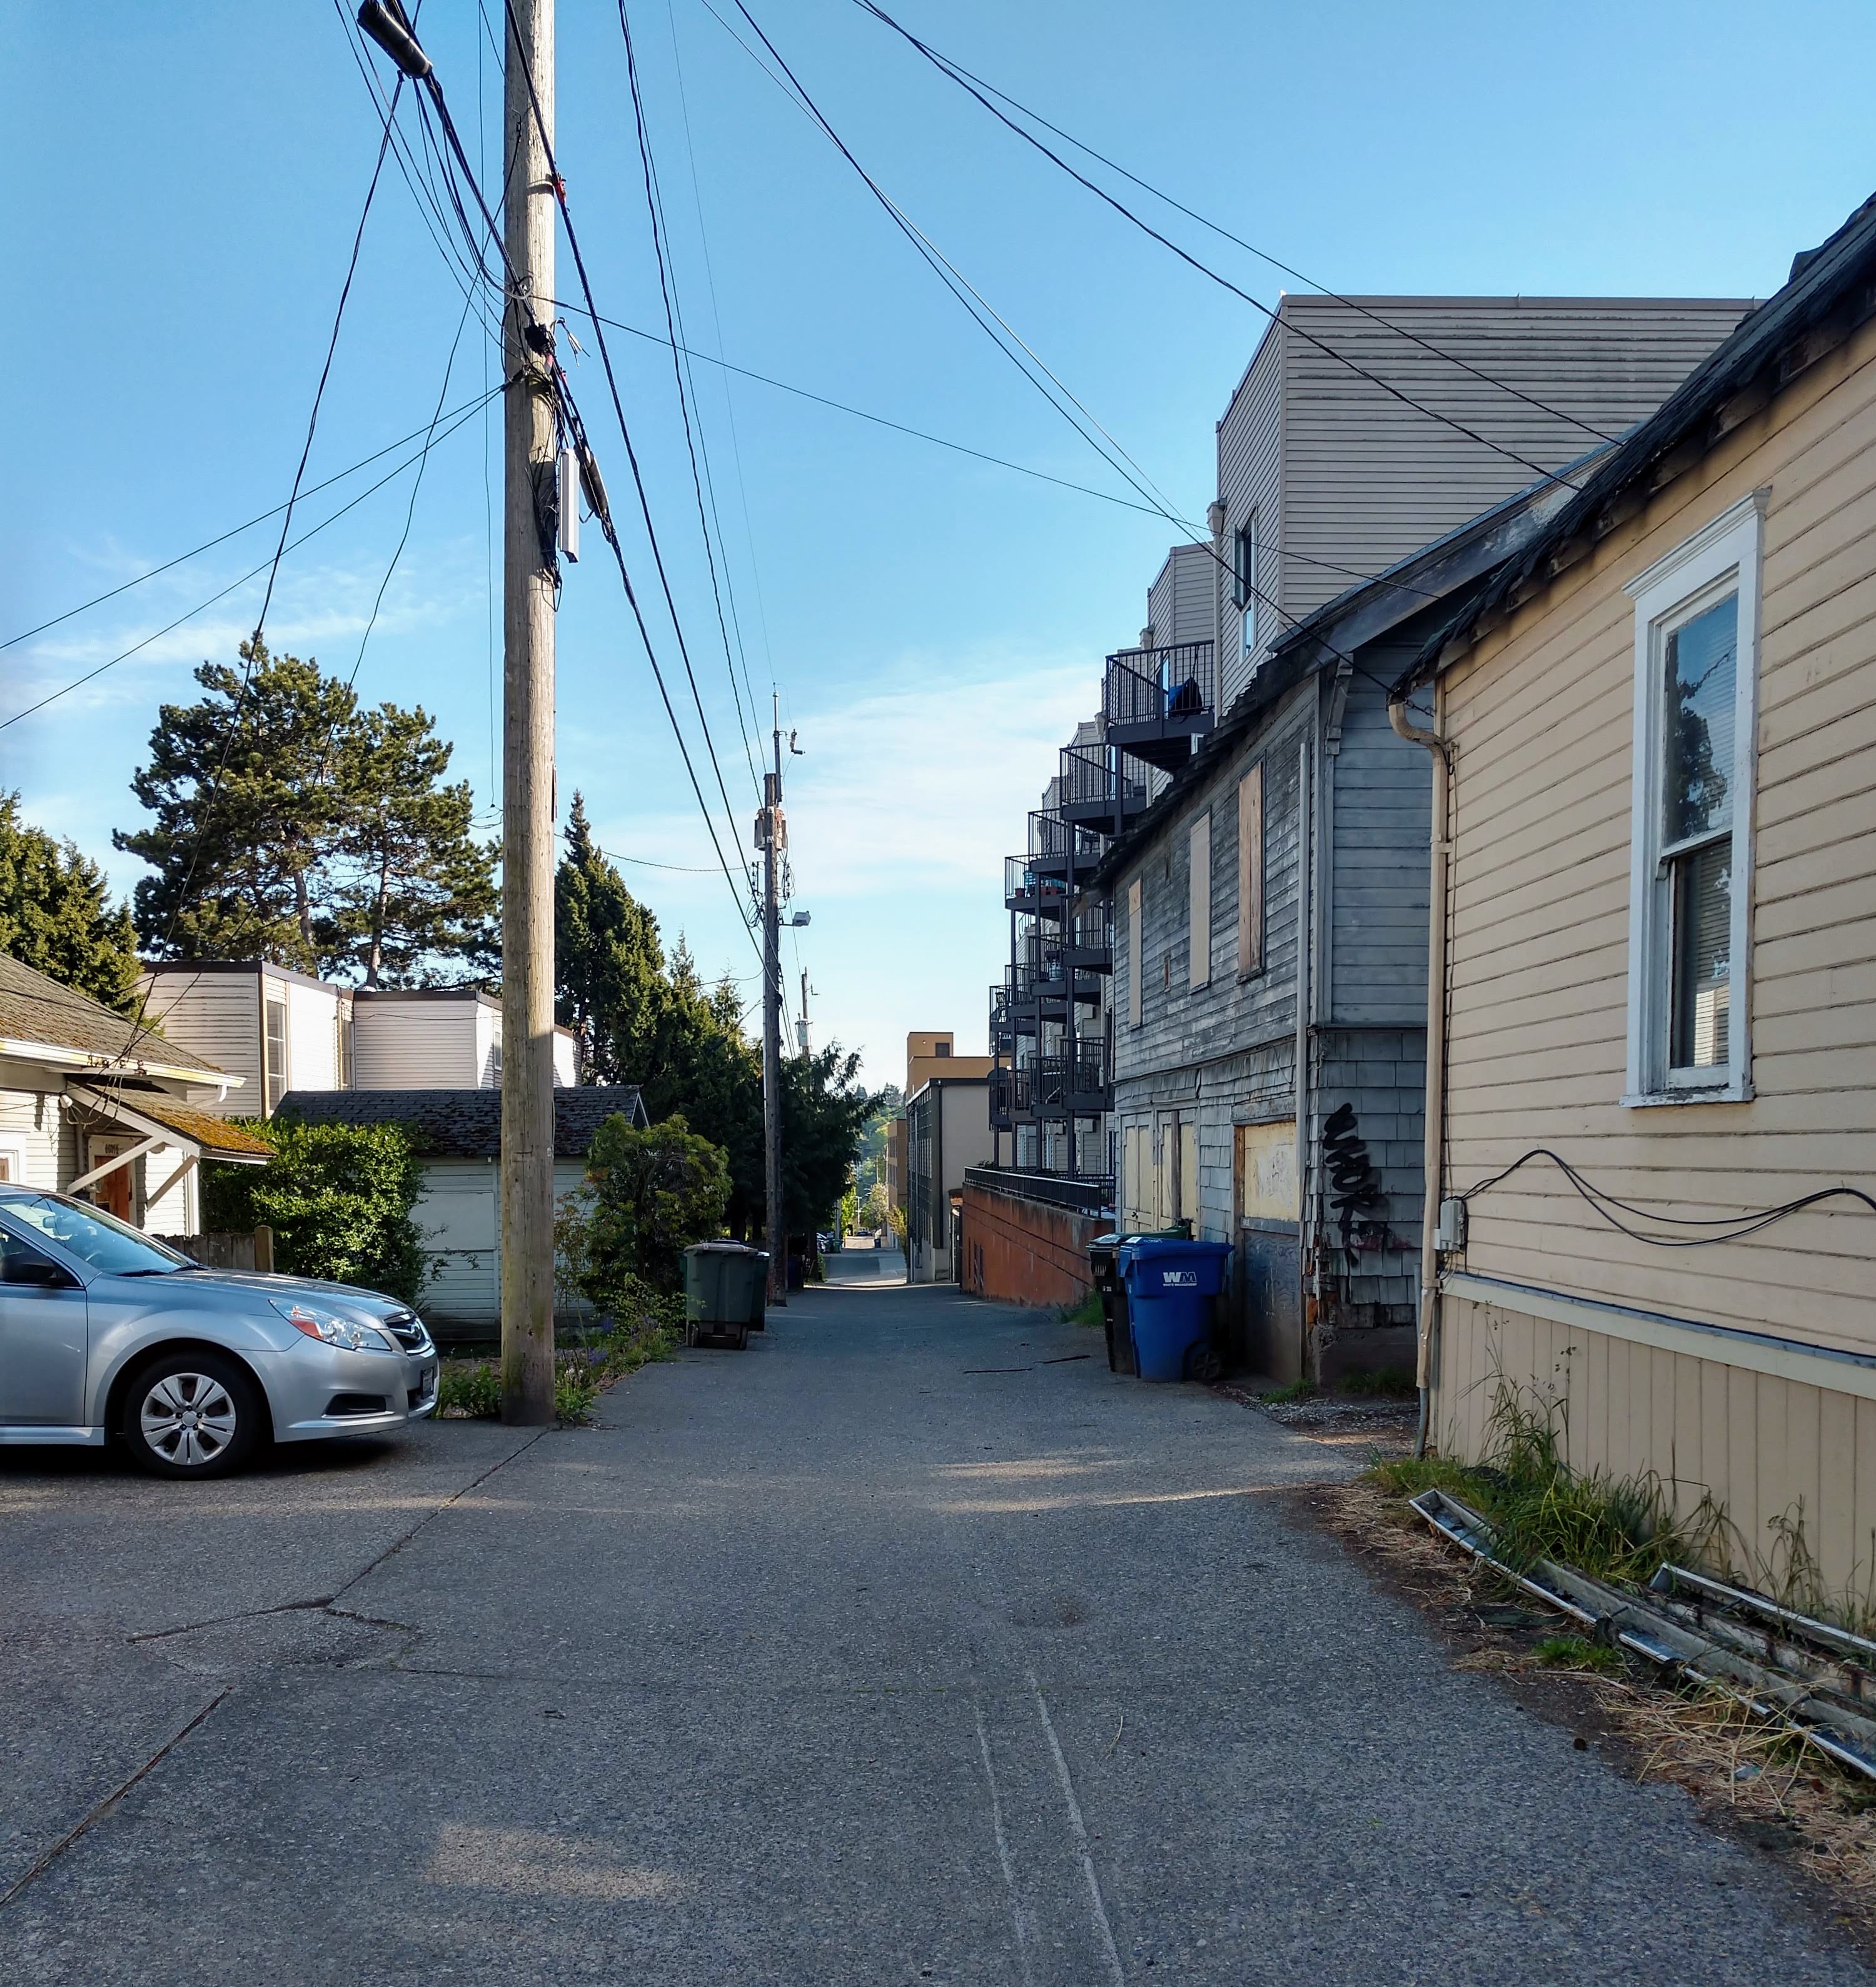 Midrise zoning meets low-rise zoning in this Fremont alley. (Photo by Doug Trumm)